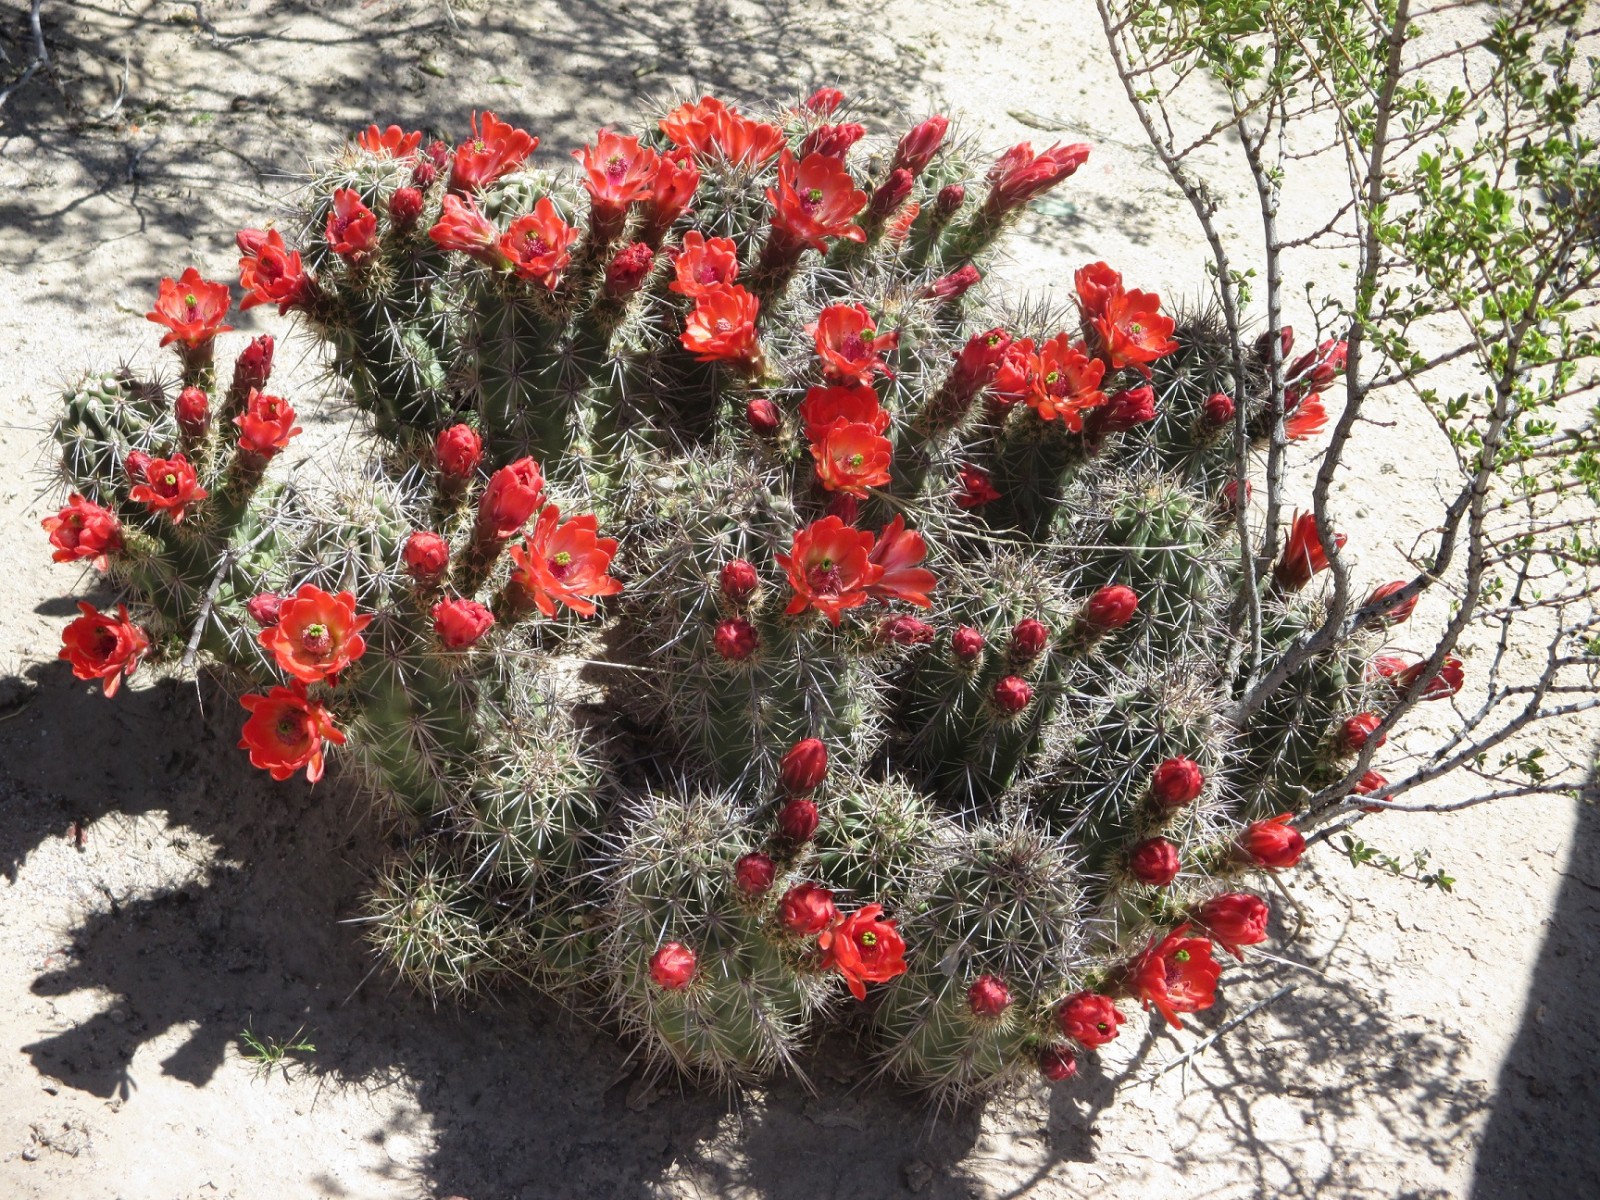 A cactus in bloom at Fort Selden Historic Site.